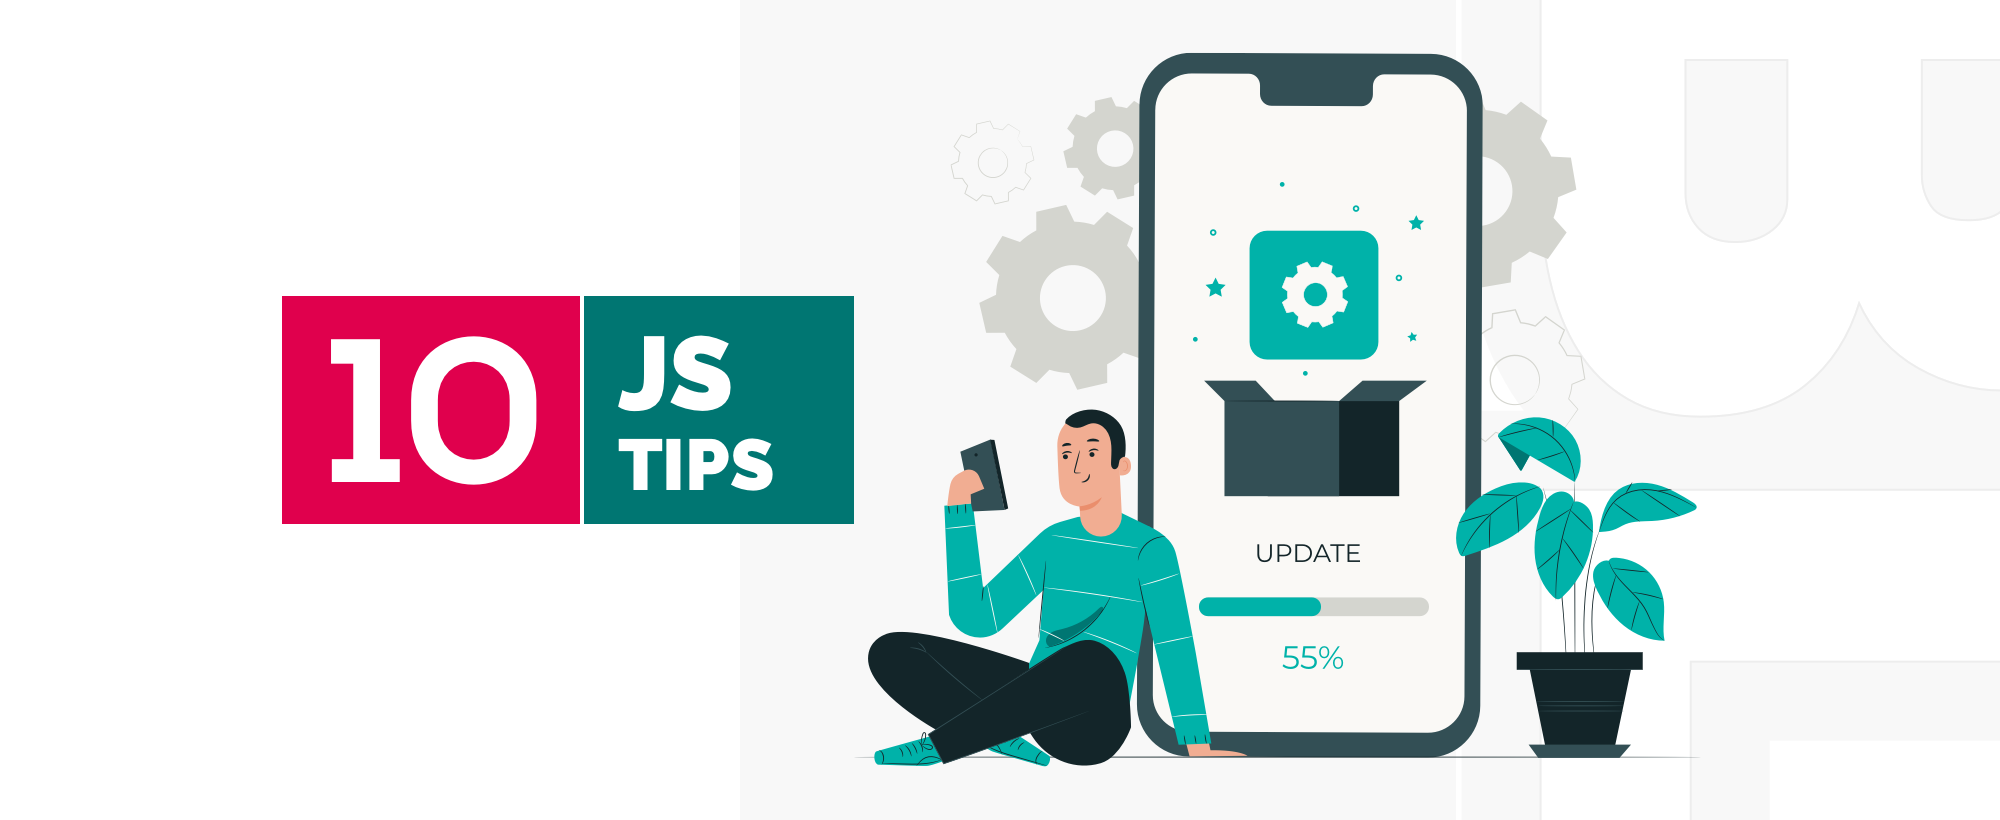 Top 10 Tips to increase the performance of your JavaScript app in 2023